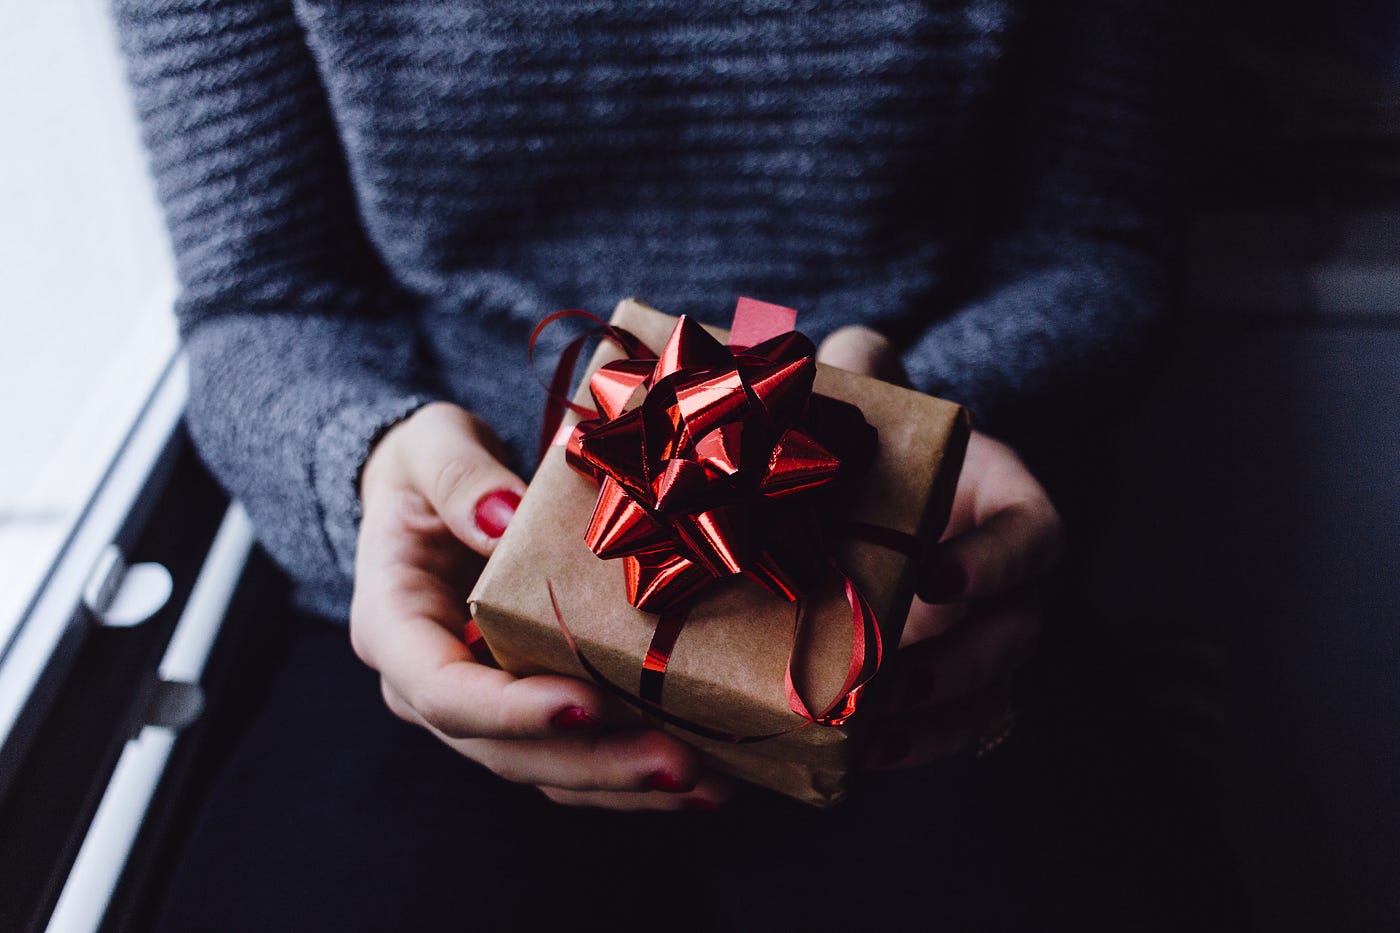 When Gift Giving/Receiving Is Your Love Language, by Gina Clingan